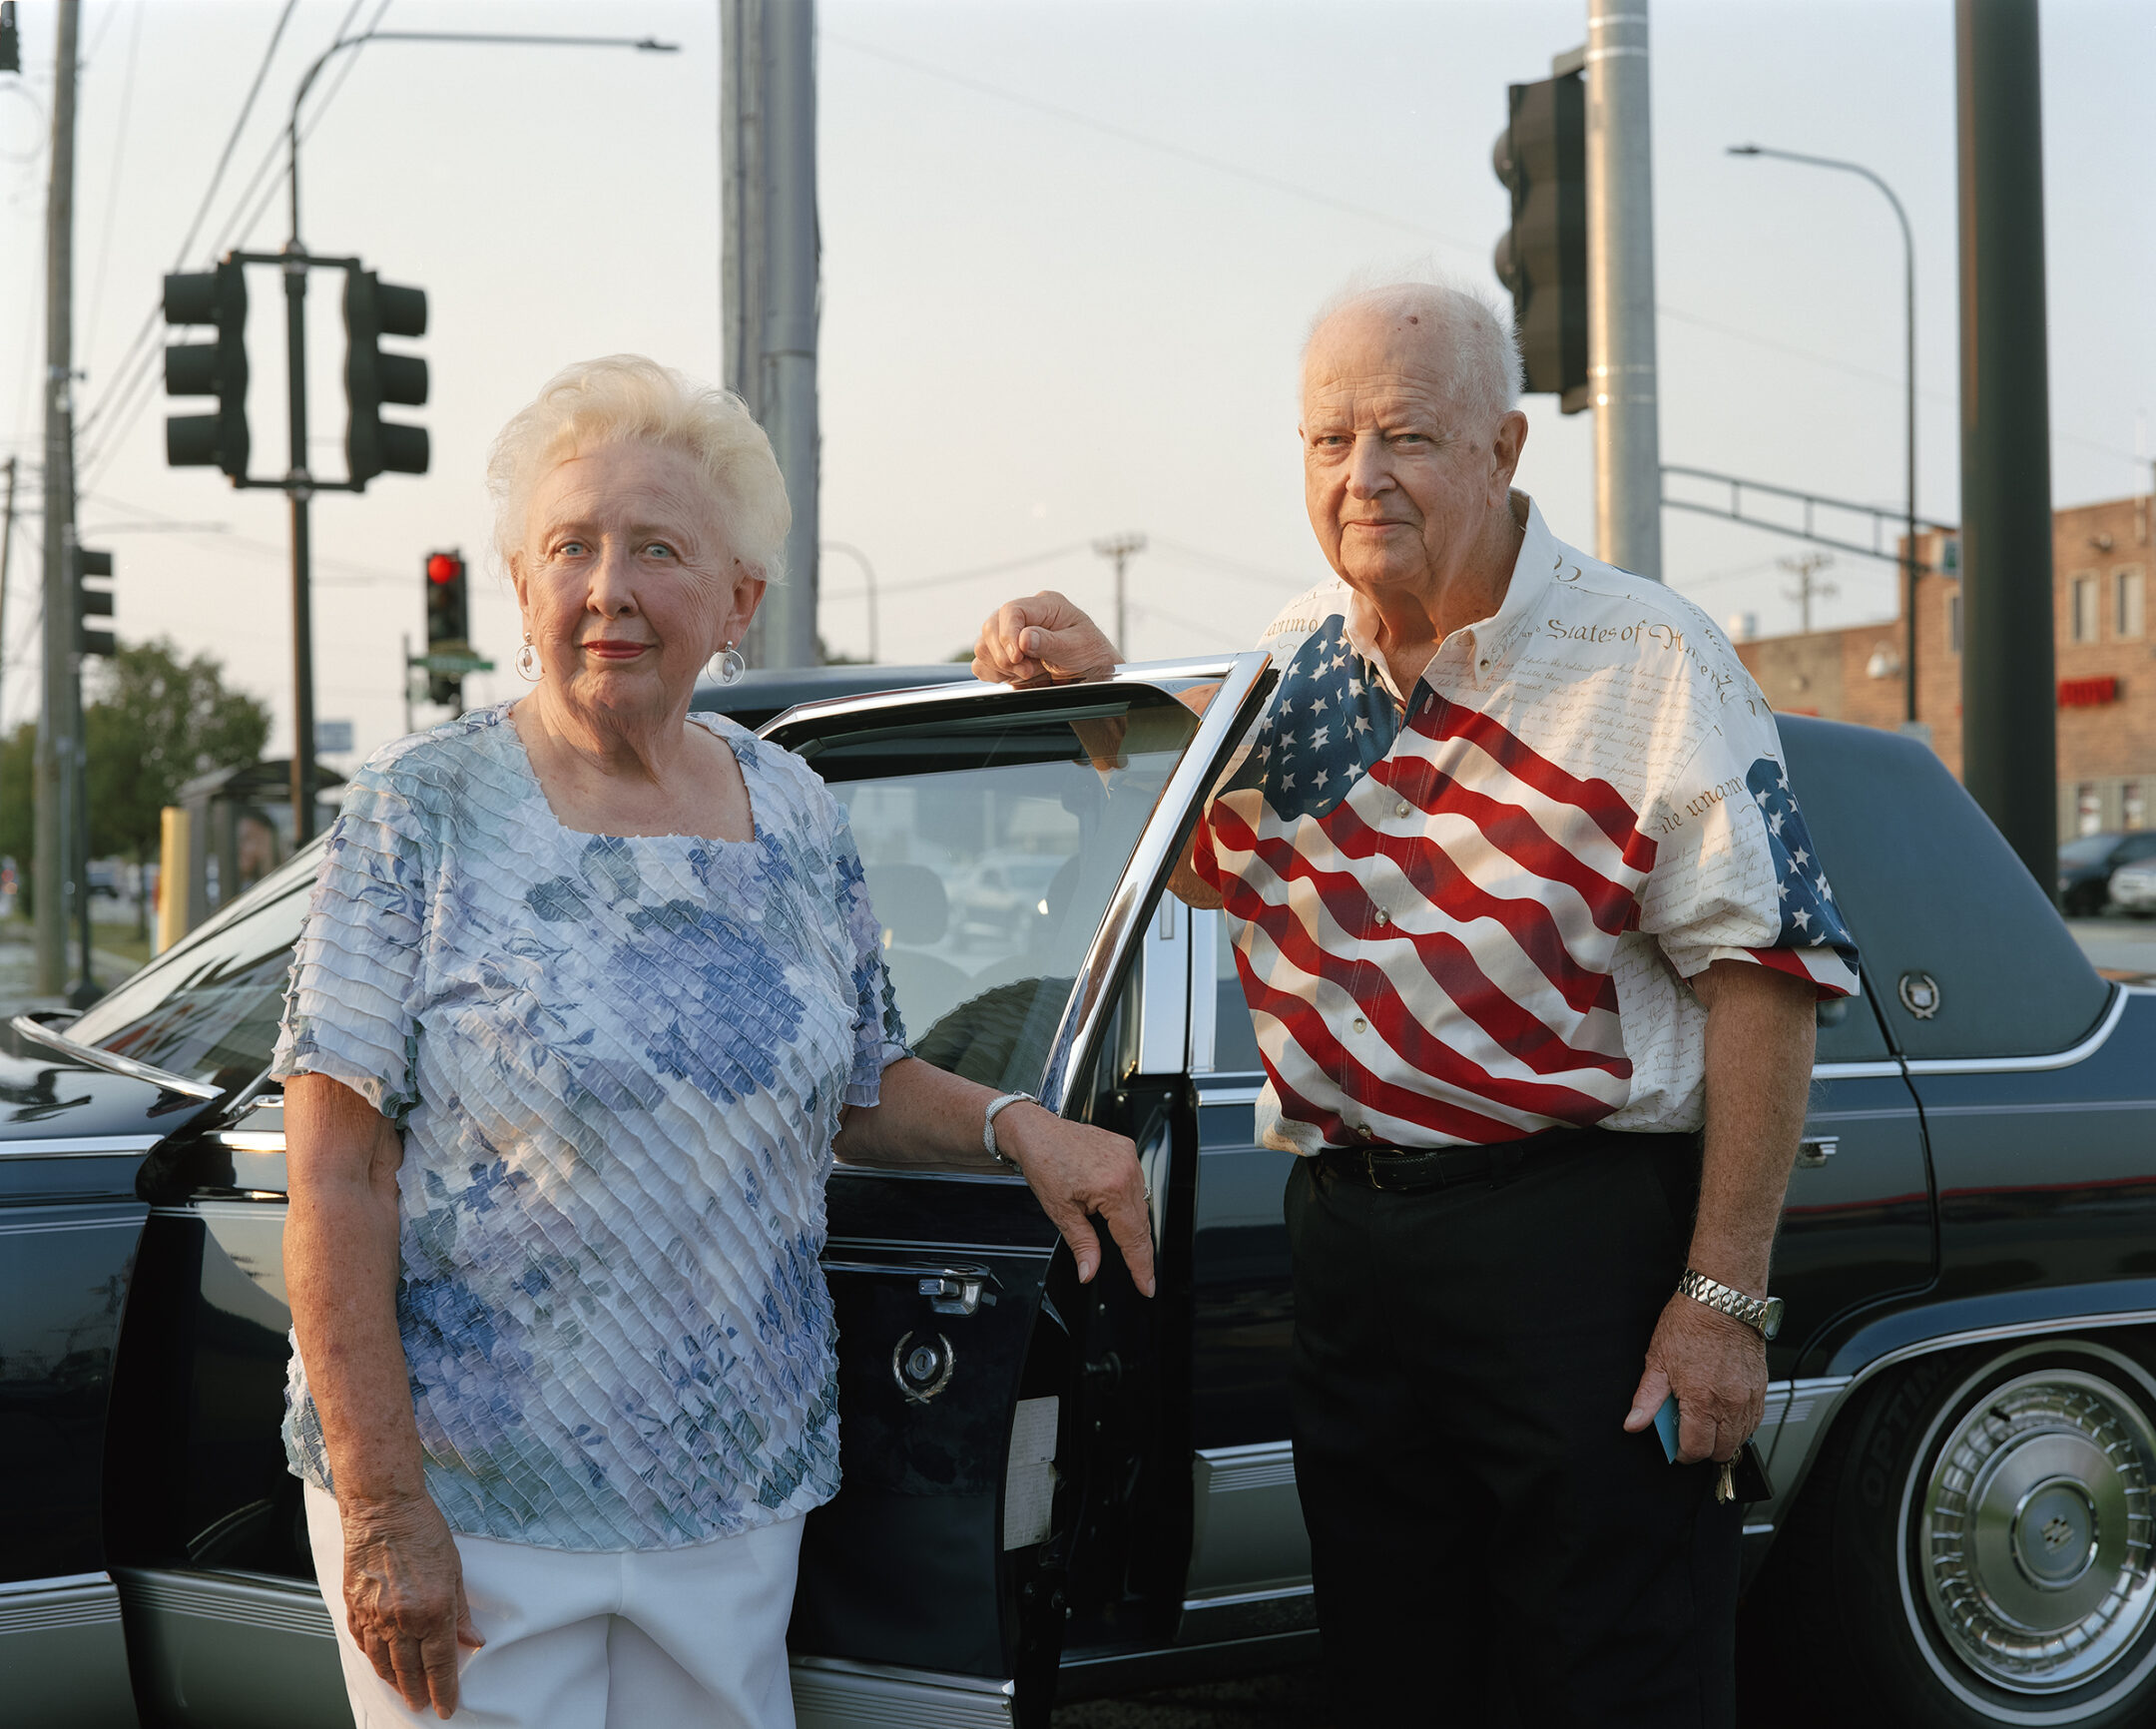 Paul D'Amato - 4th of July Couple, 2021